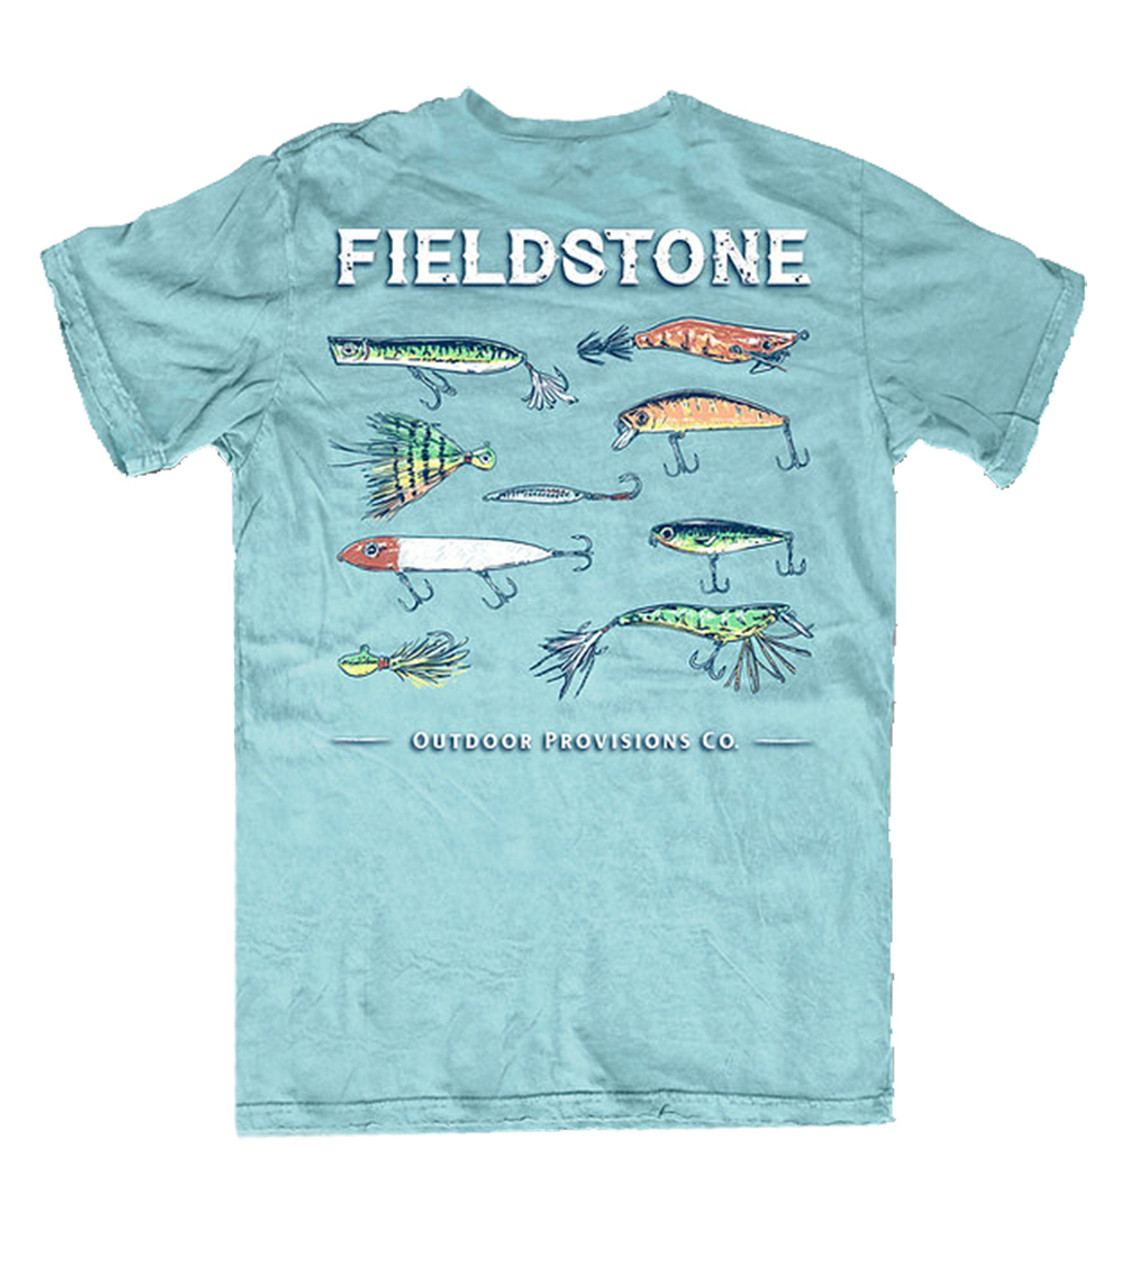 Fieldstone Outdoors Provisions Co. Fishing Lures Comfort Colors